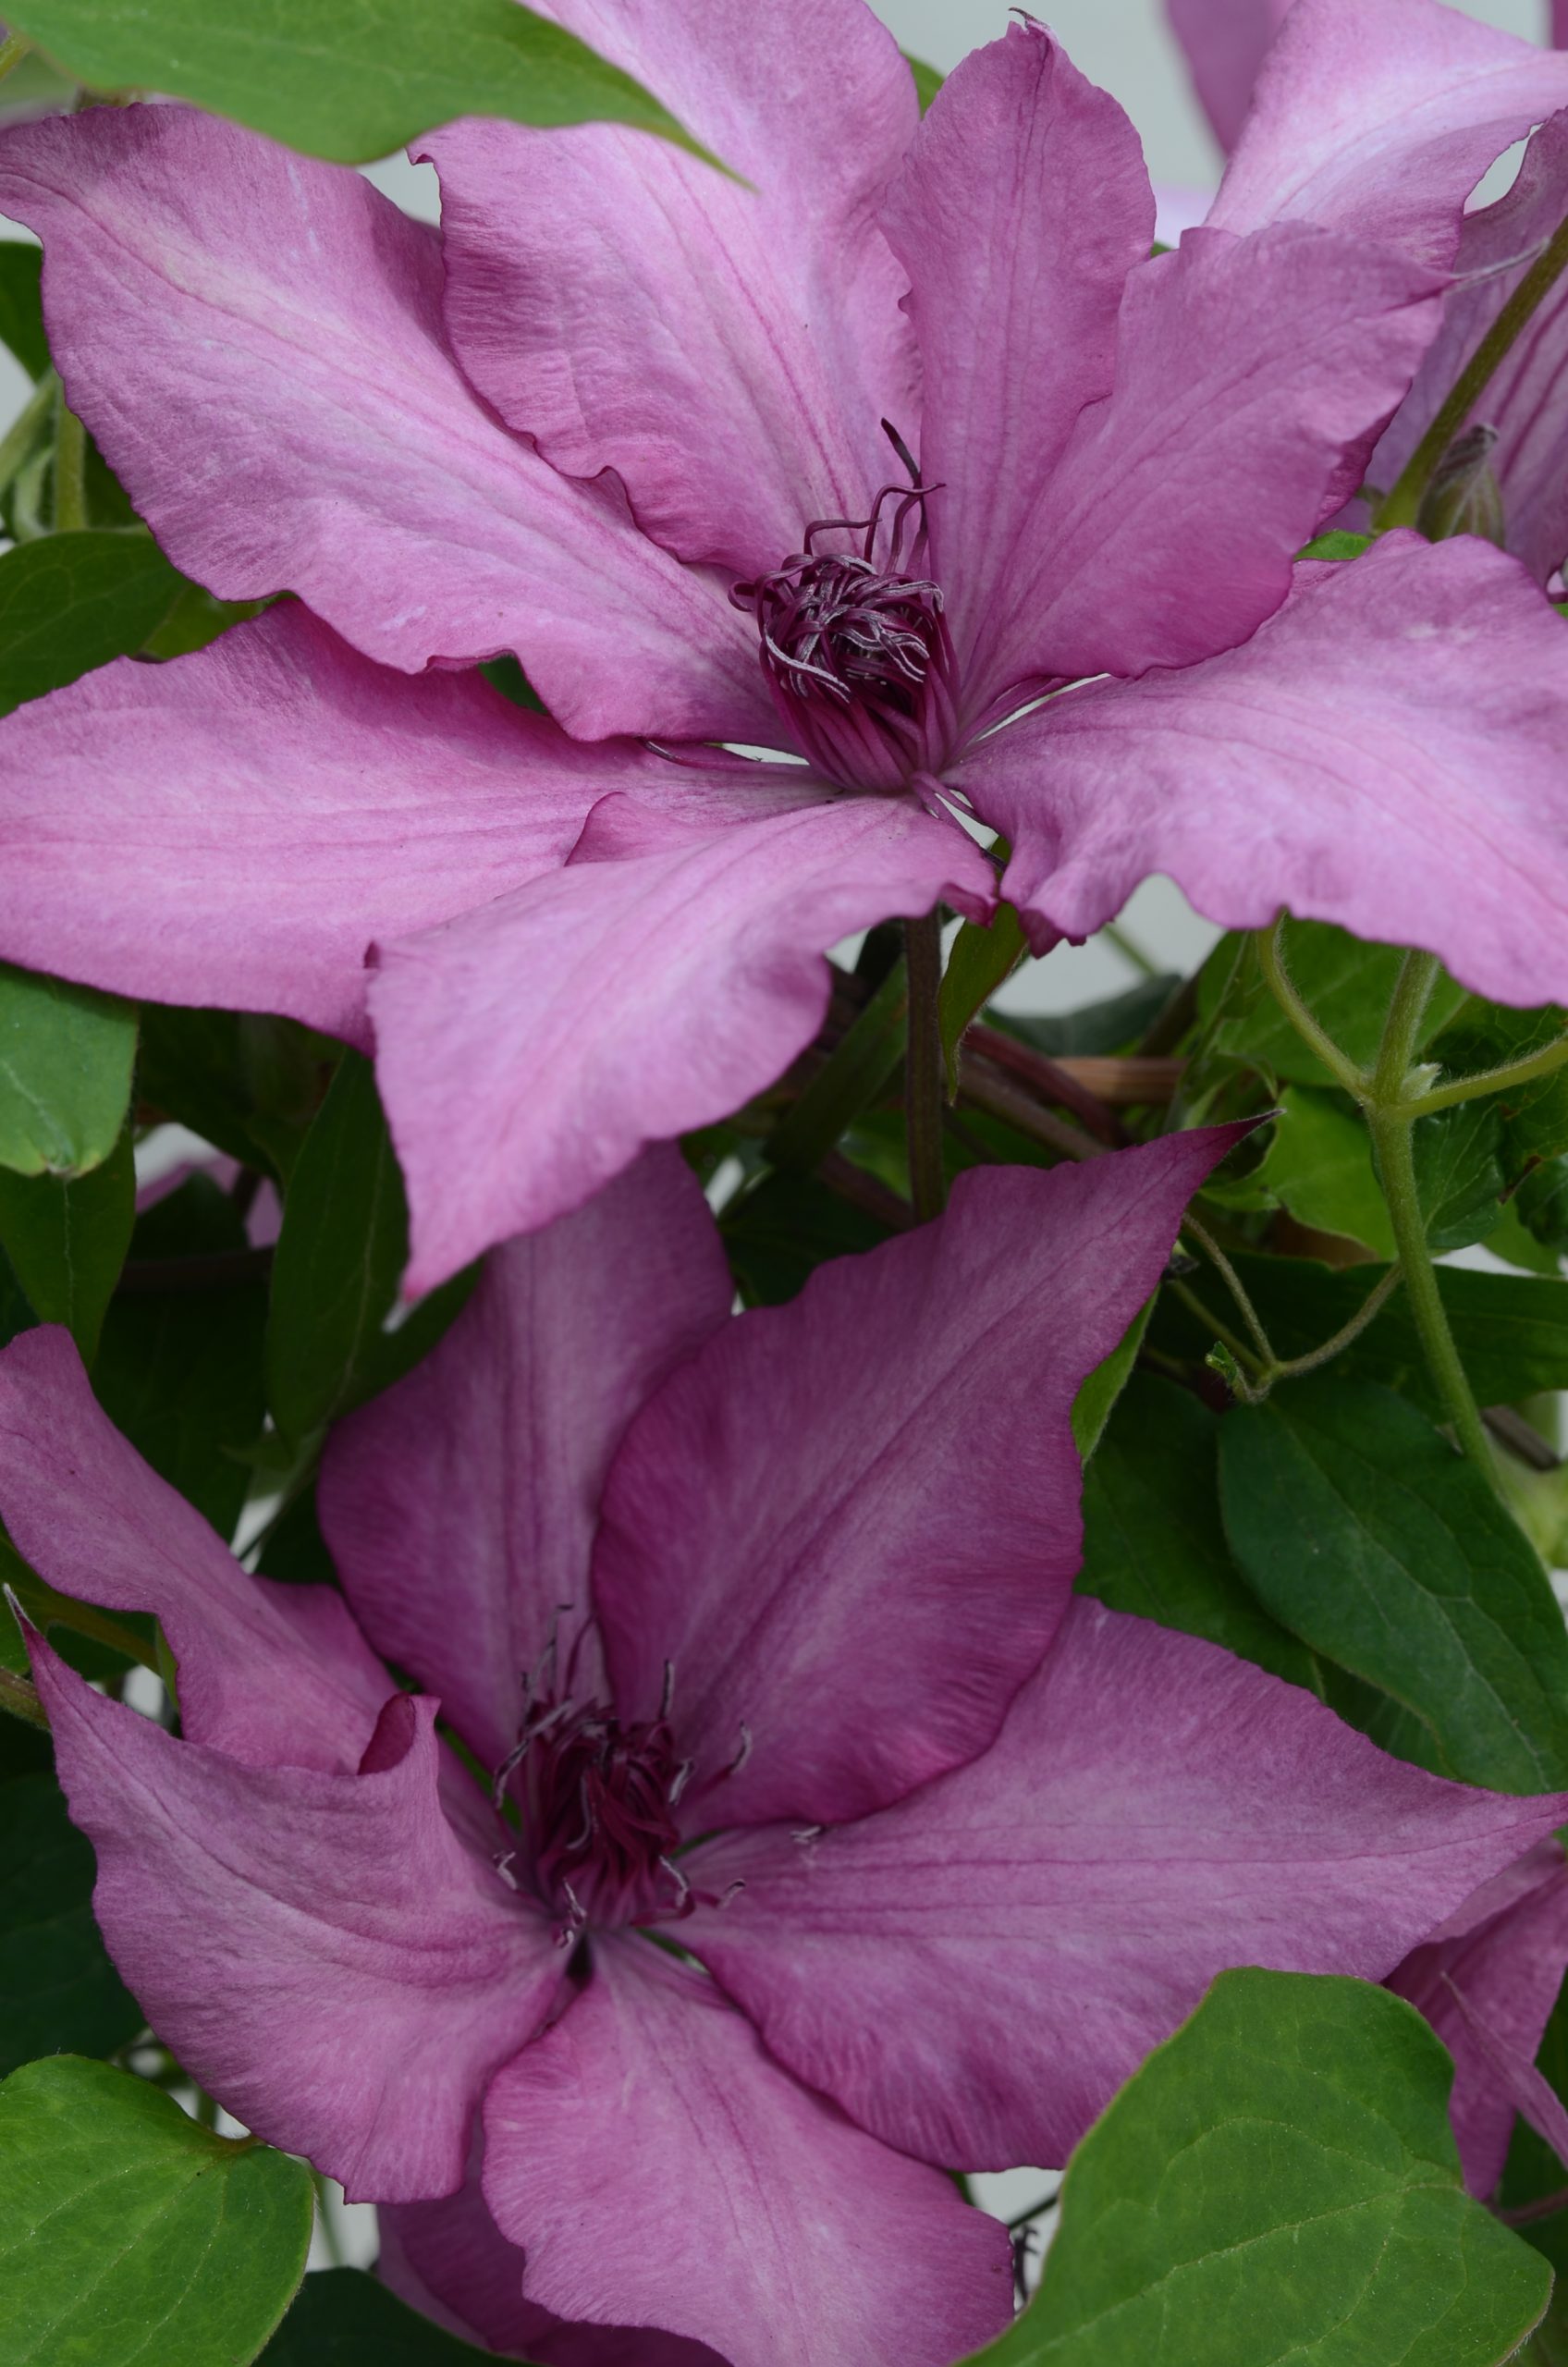 A dusky purple pink clematis with red-purple anthers